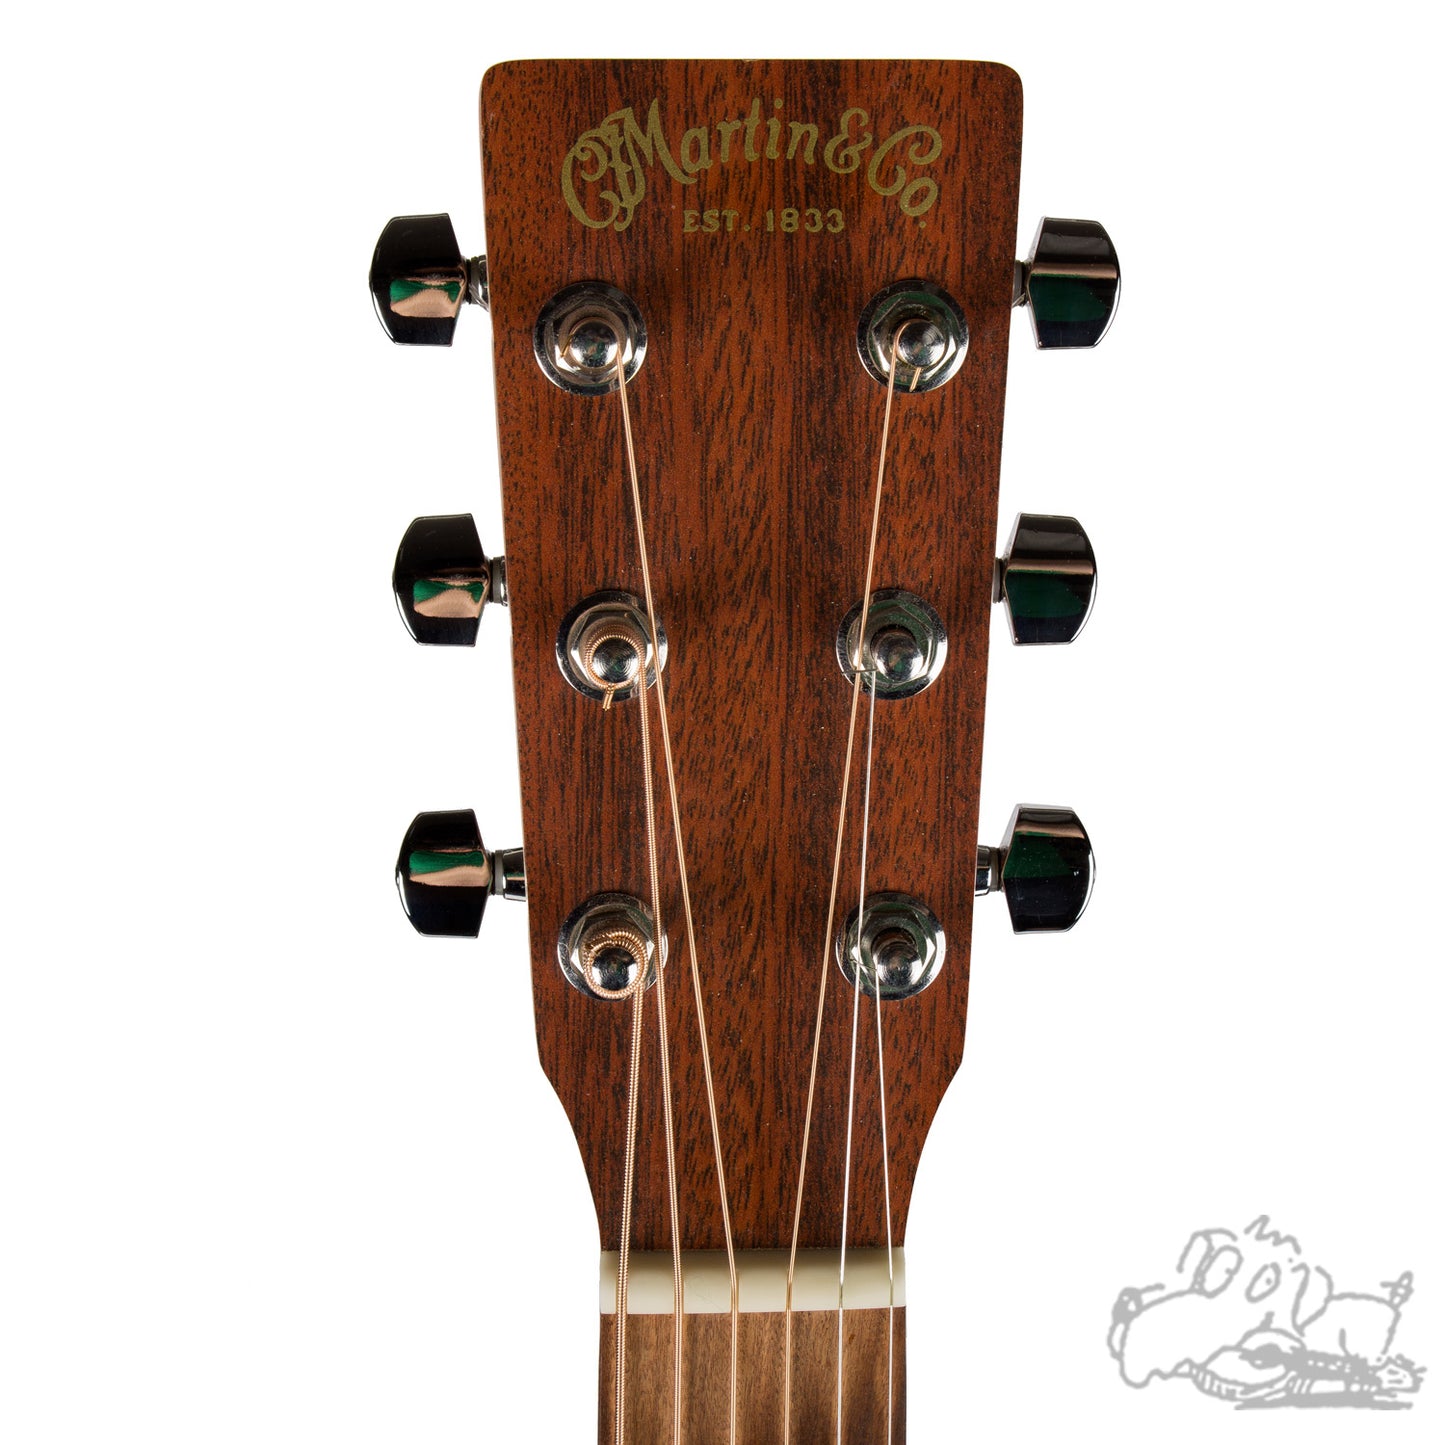 Previously Owned 2006 Martin DX-1